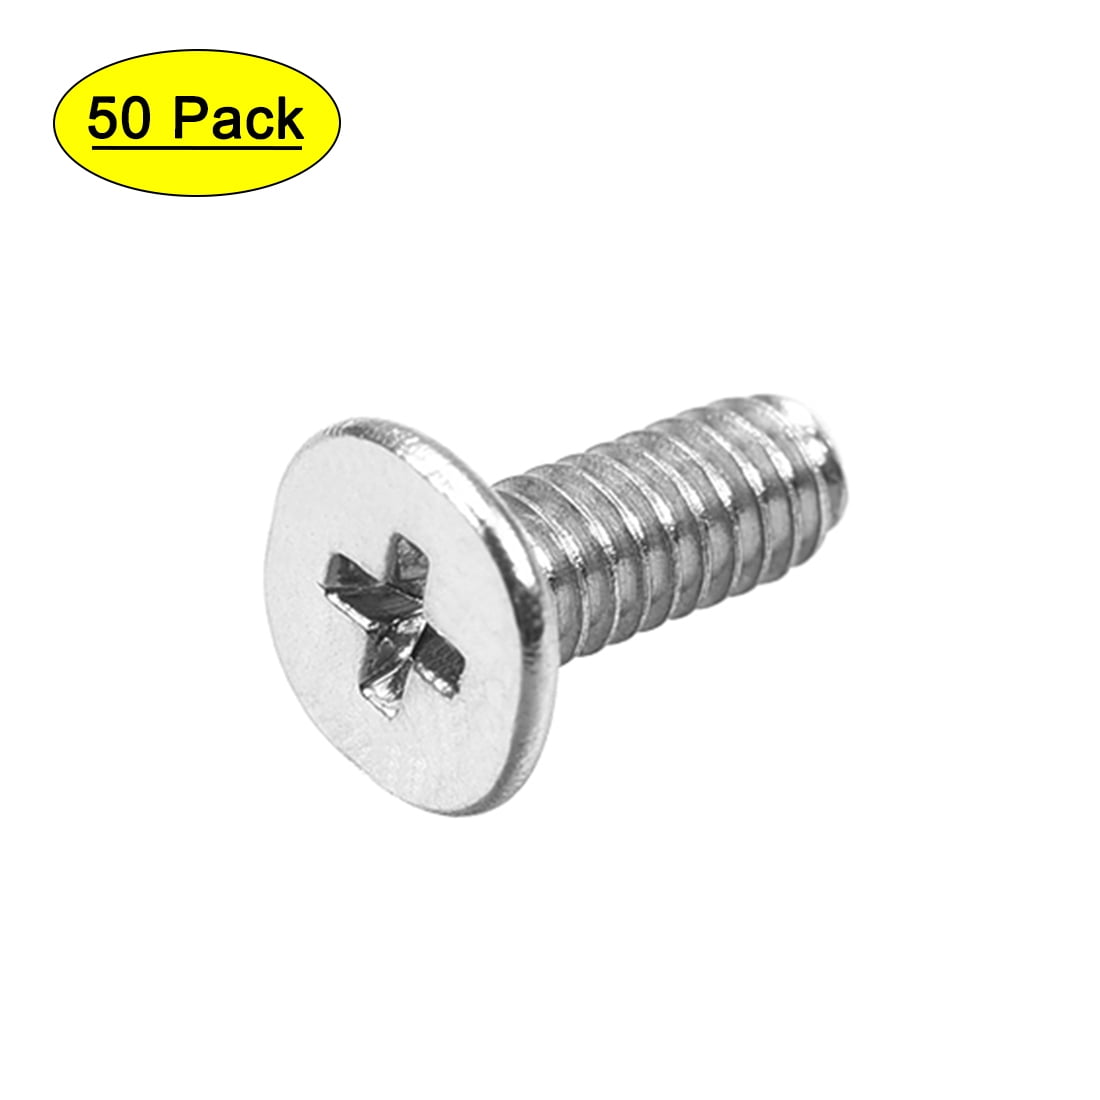 Color : Silver, Size : 3mm Happy Shop Screw 20-100Pcs M1 M2 M2.5 M3 M4 KM Screw SSD Electronic Repair Screws Accessories Compatible with Sony DELL Samsung IBM HP Toshiba Bolts Nuts